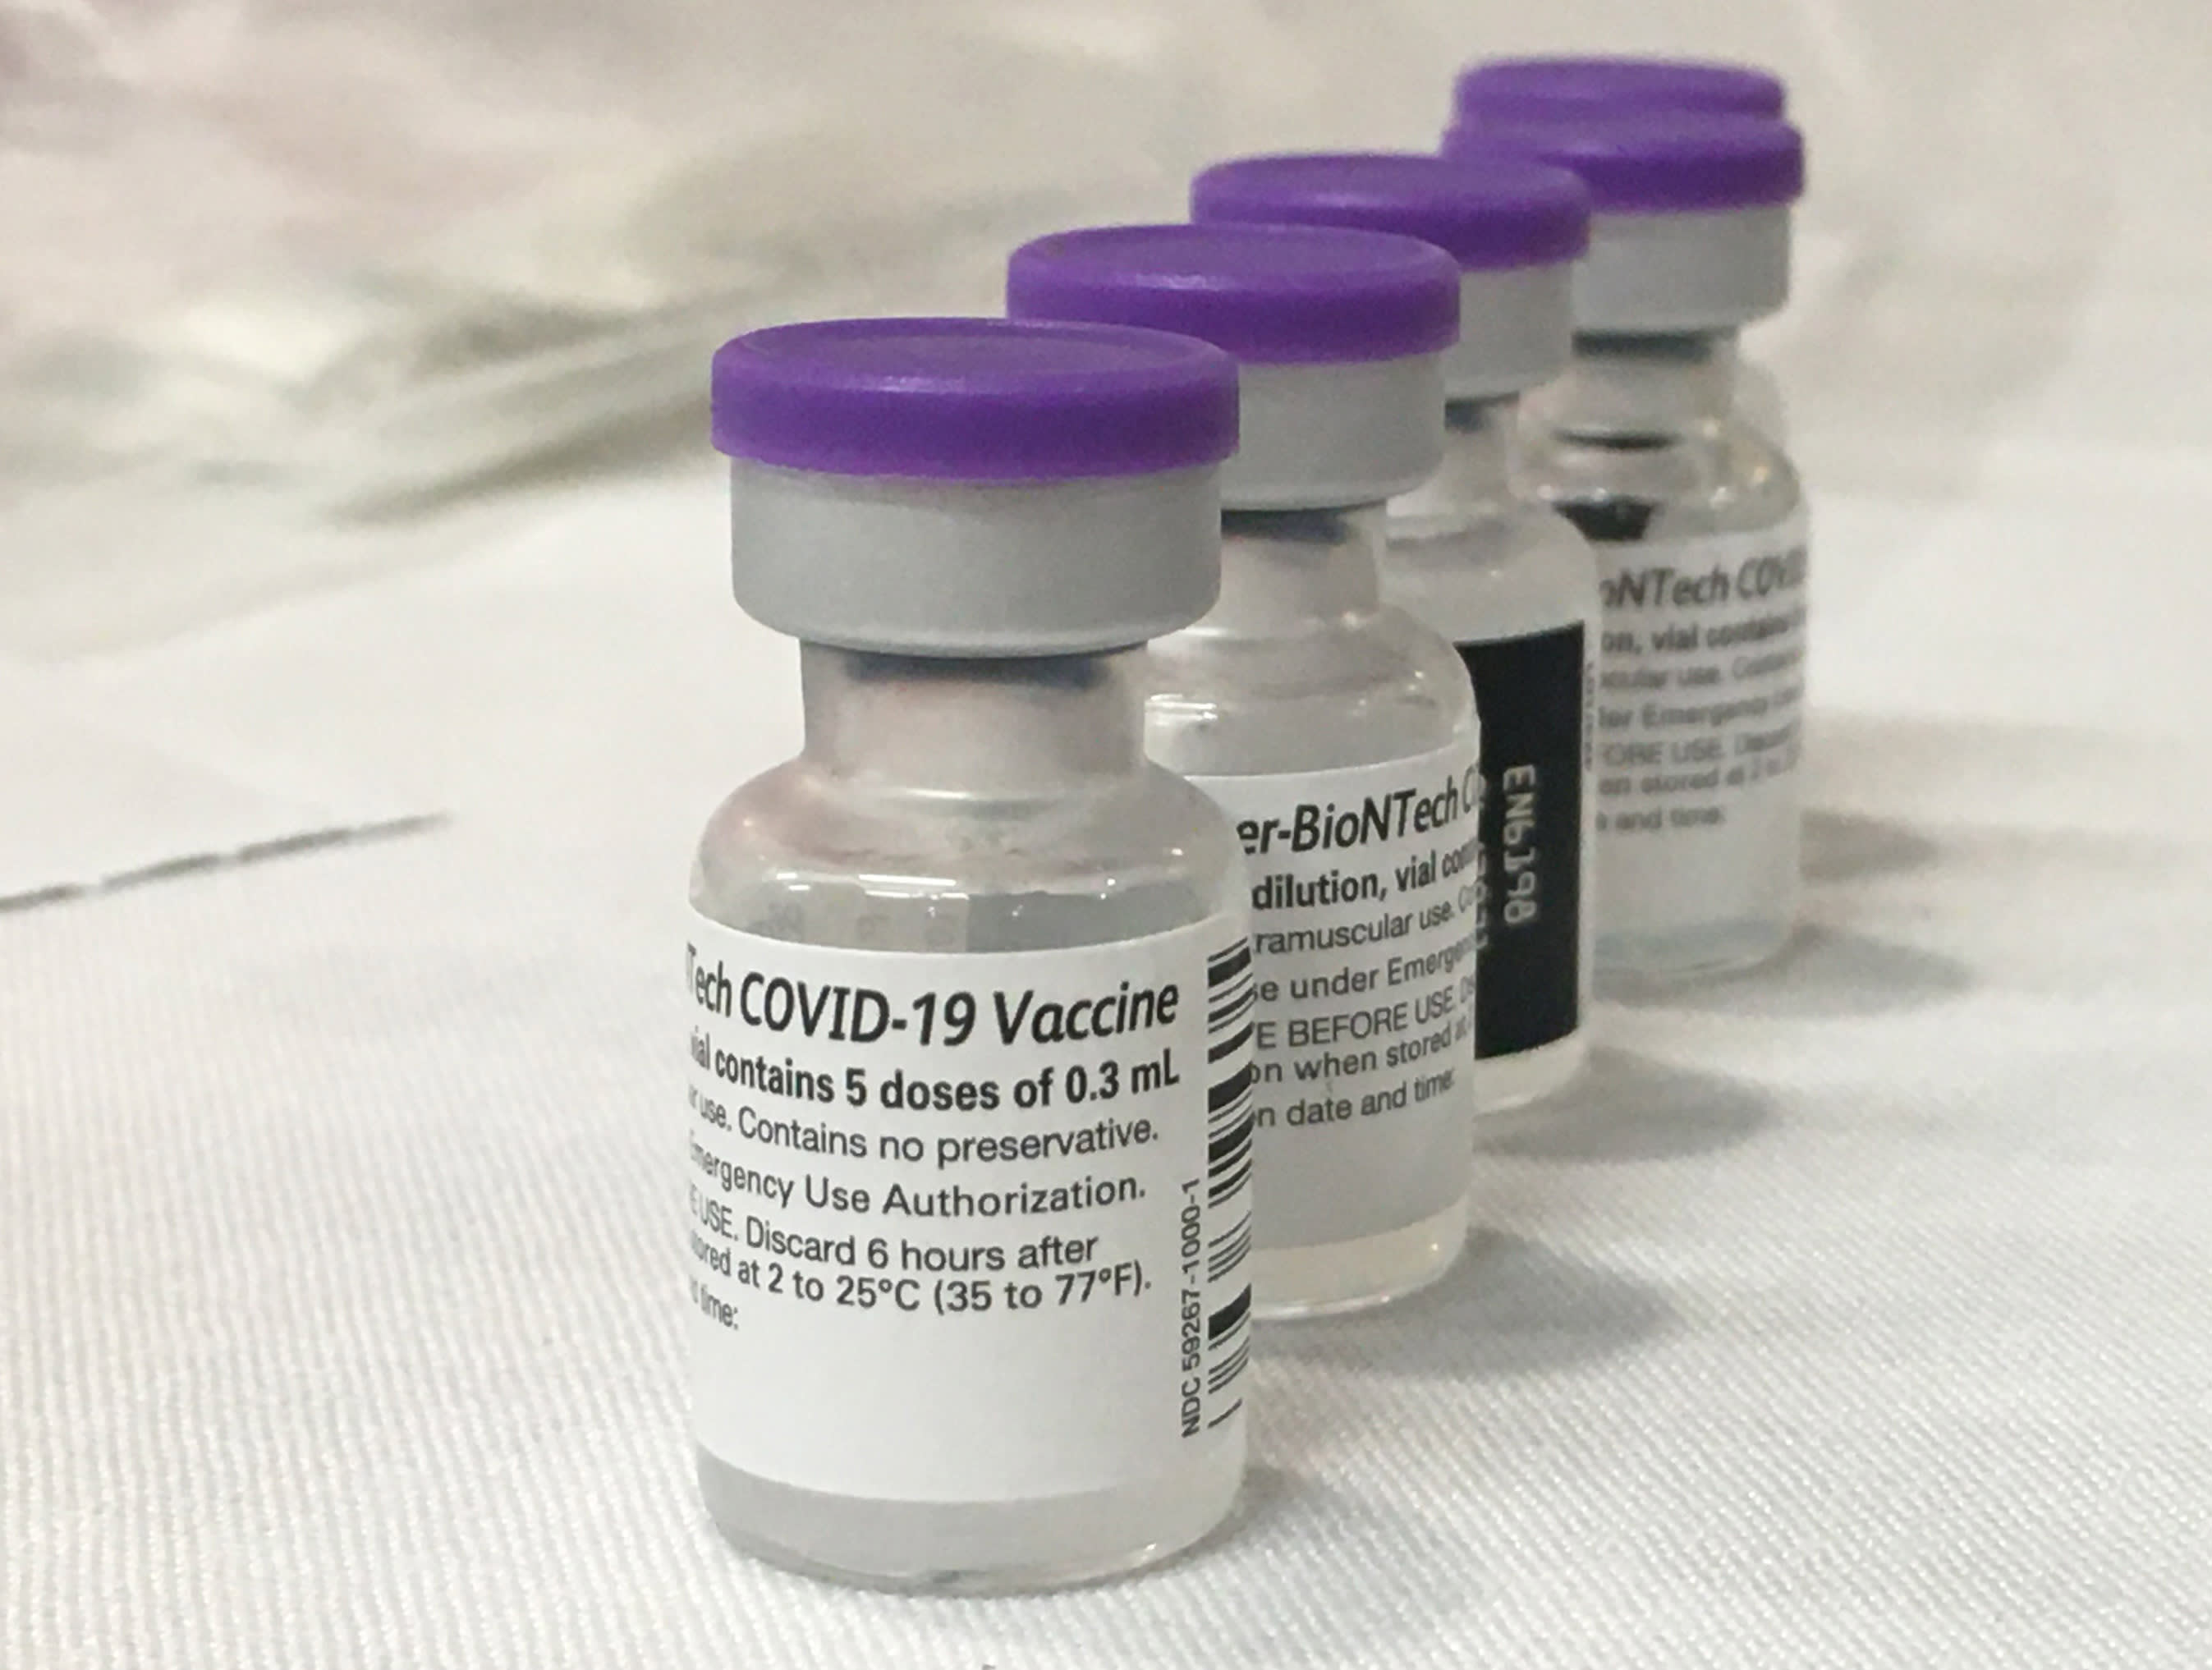 US says Russia-backed outlets are spreading ‘disinformation’ of Covid vaccine